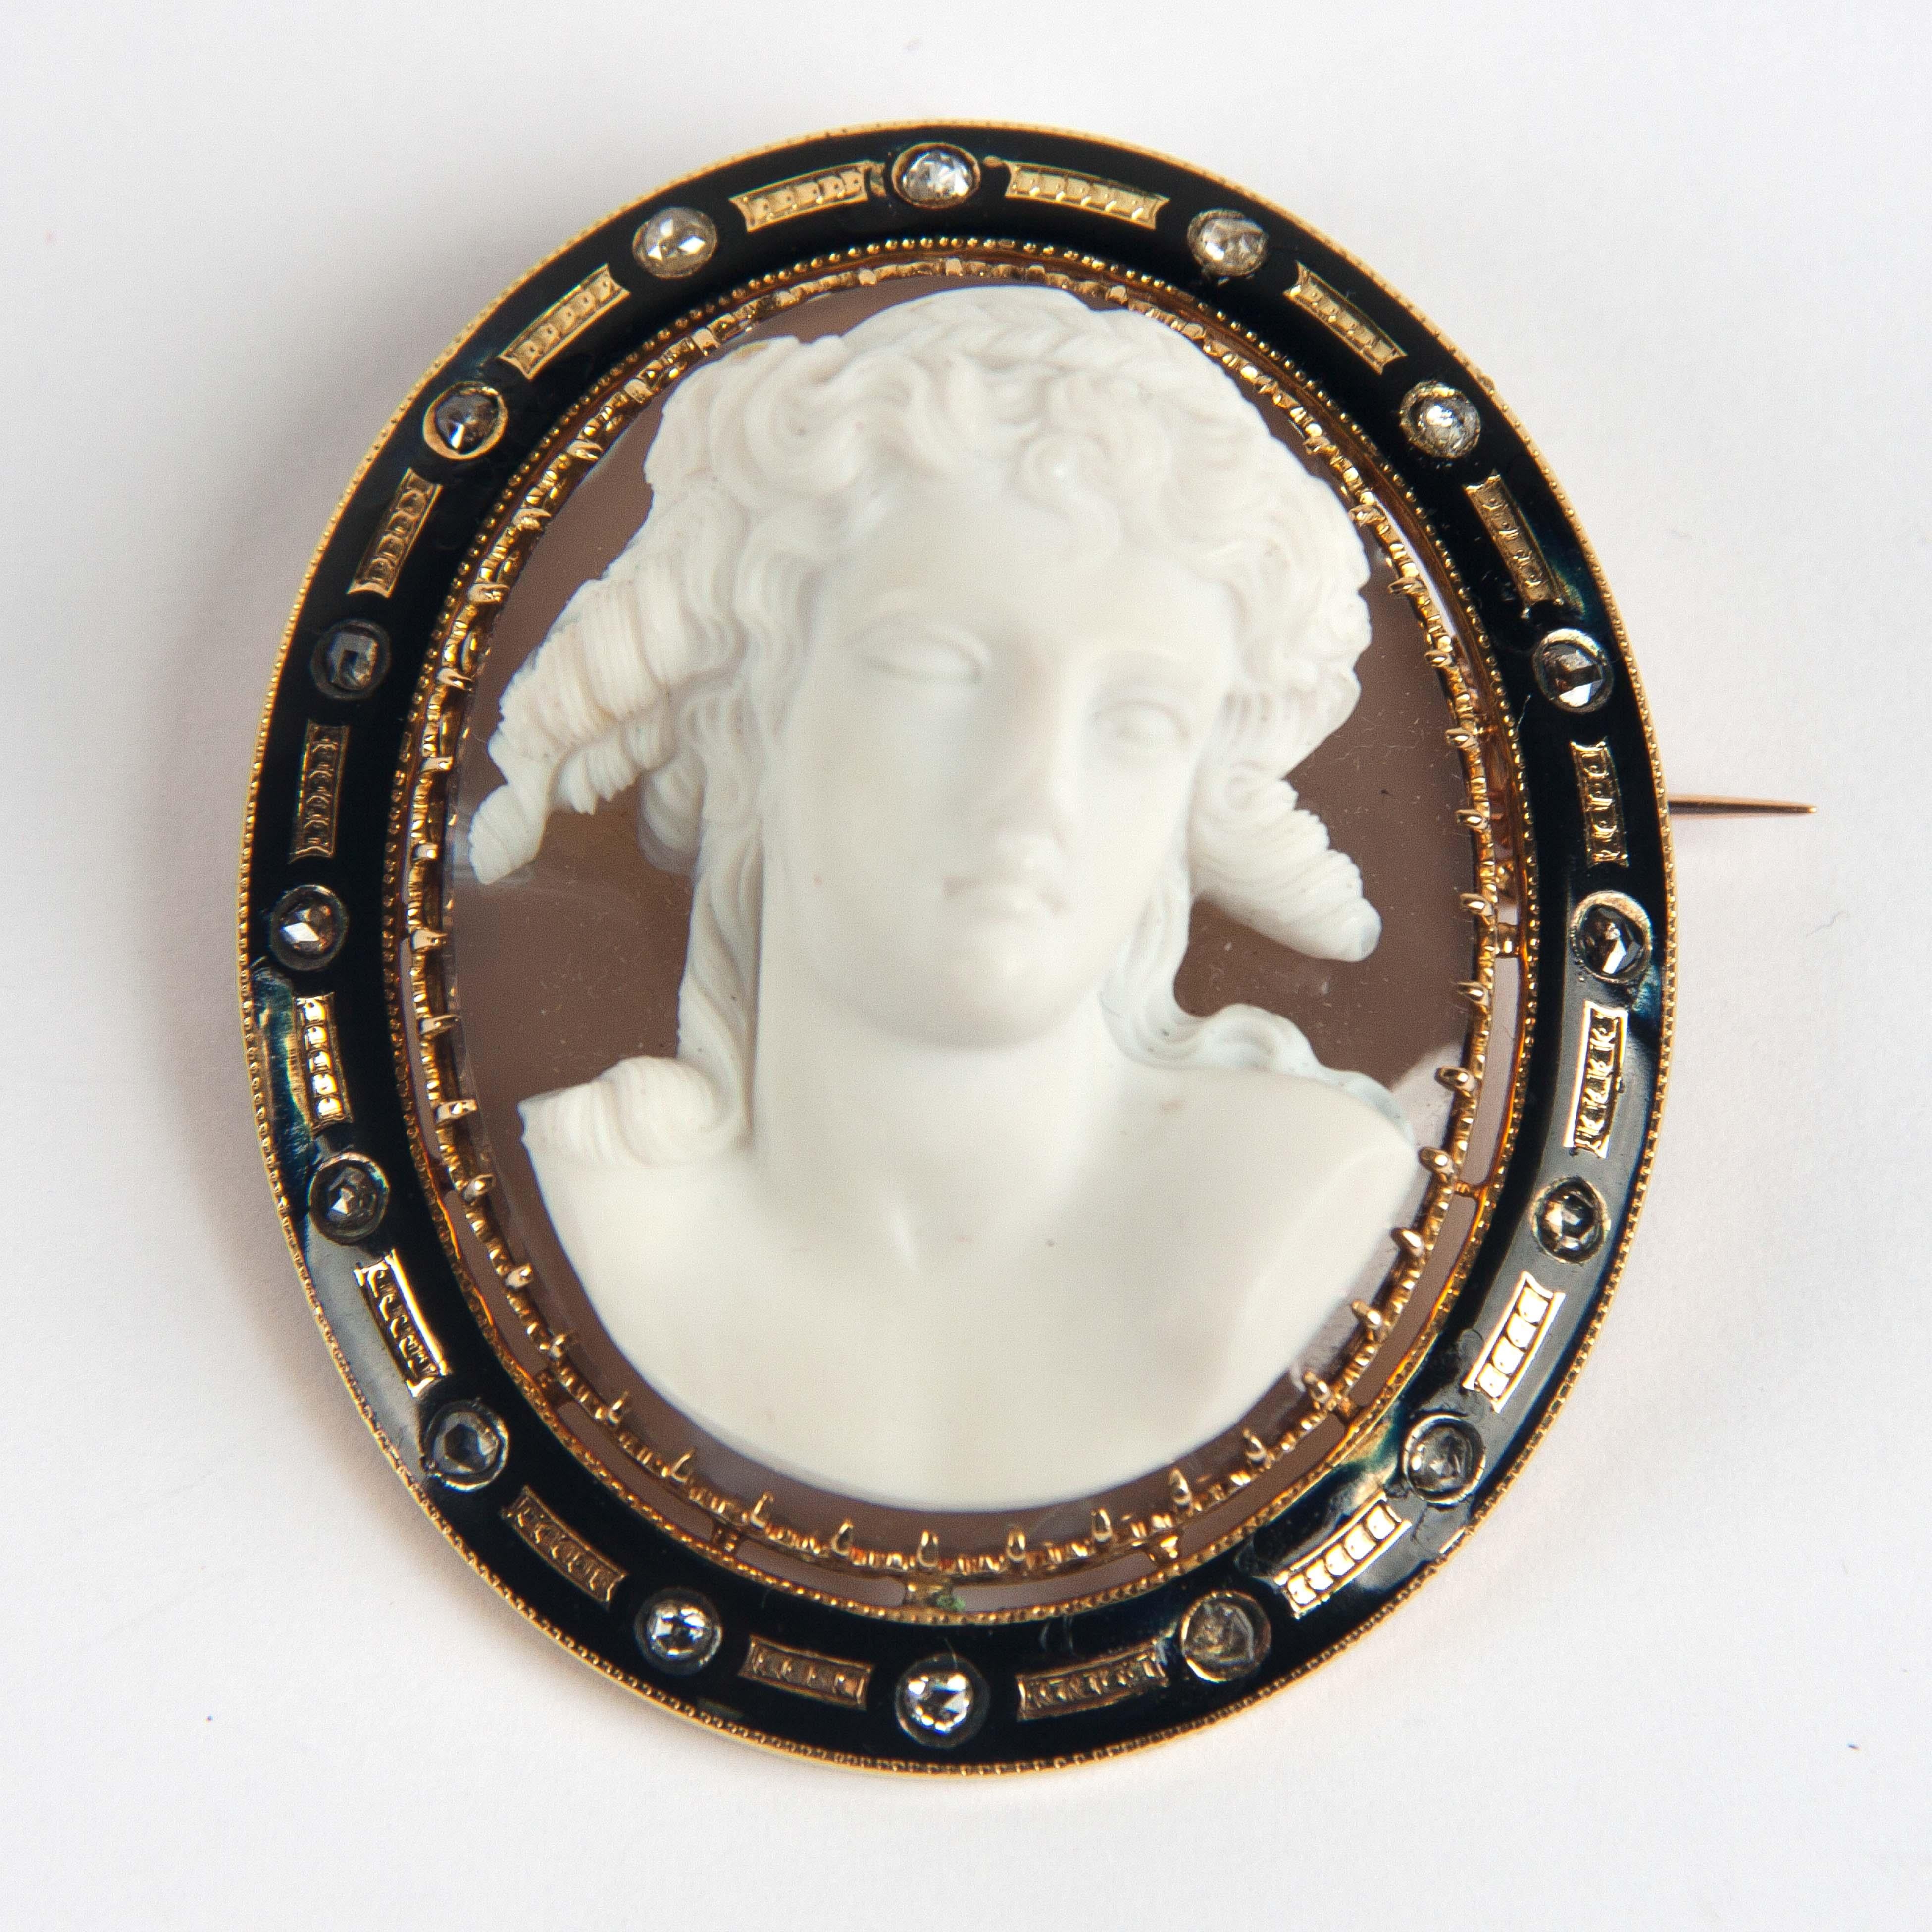 19th century golden jewel, in a fine Sèvres Porcelain carved head on a agate plate.
The frame is email de limoges with diamonds.
 